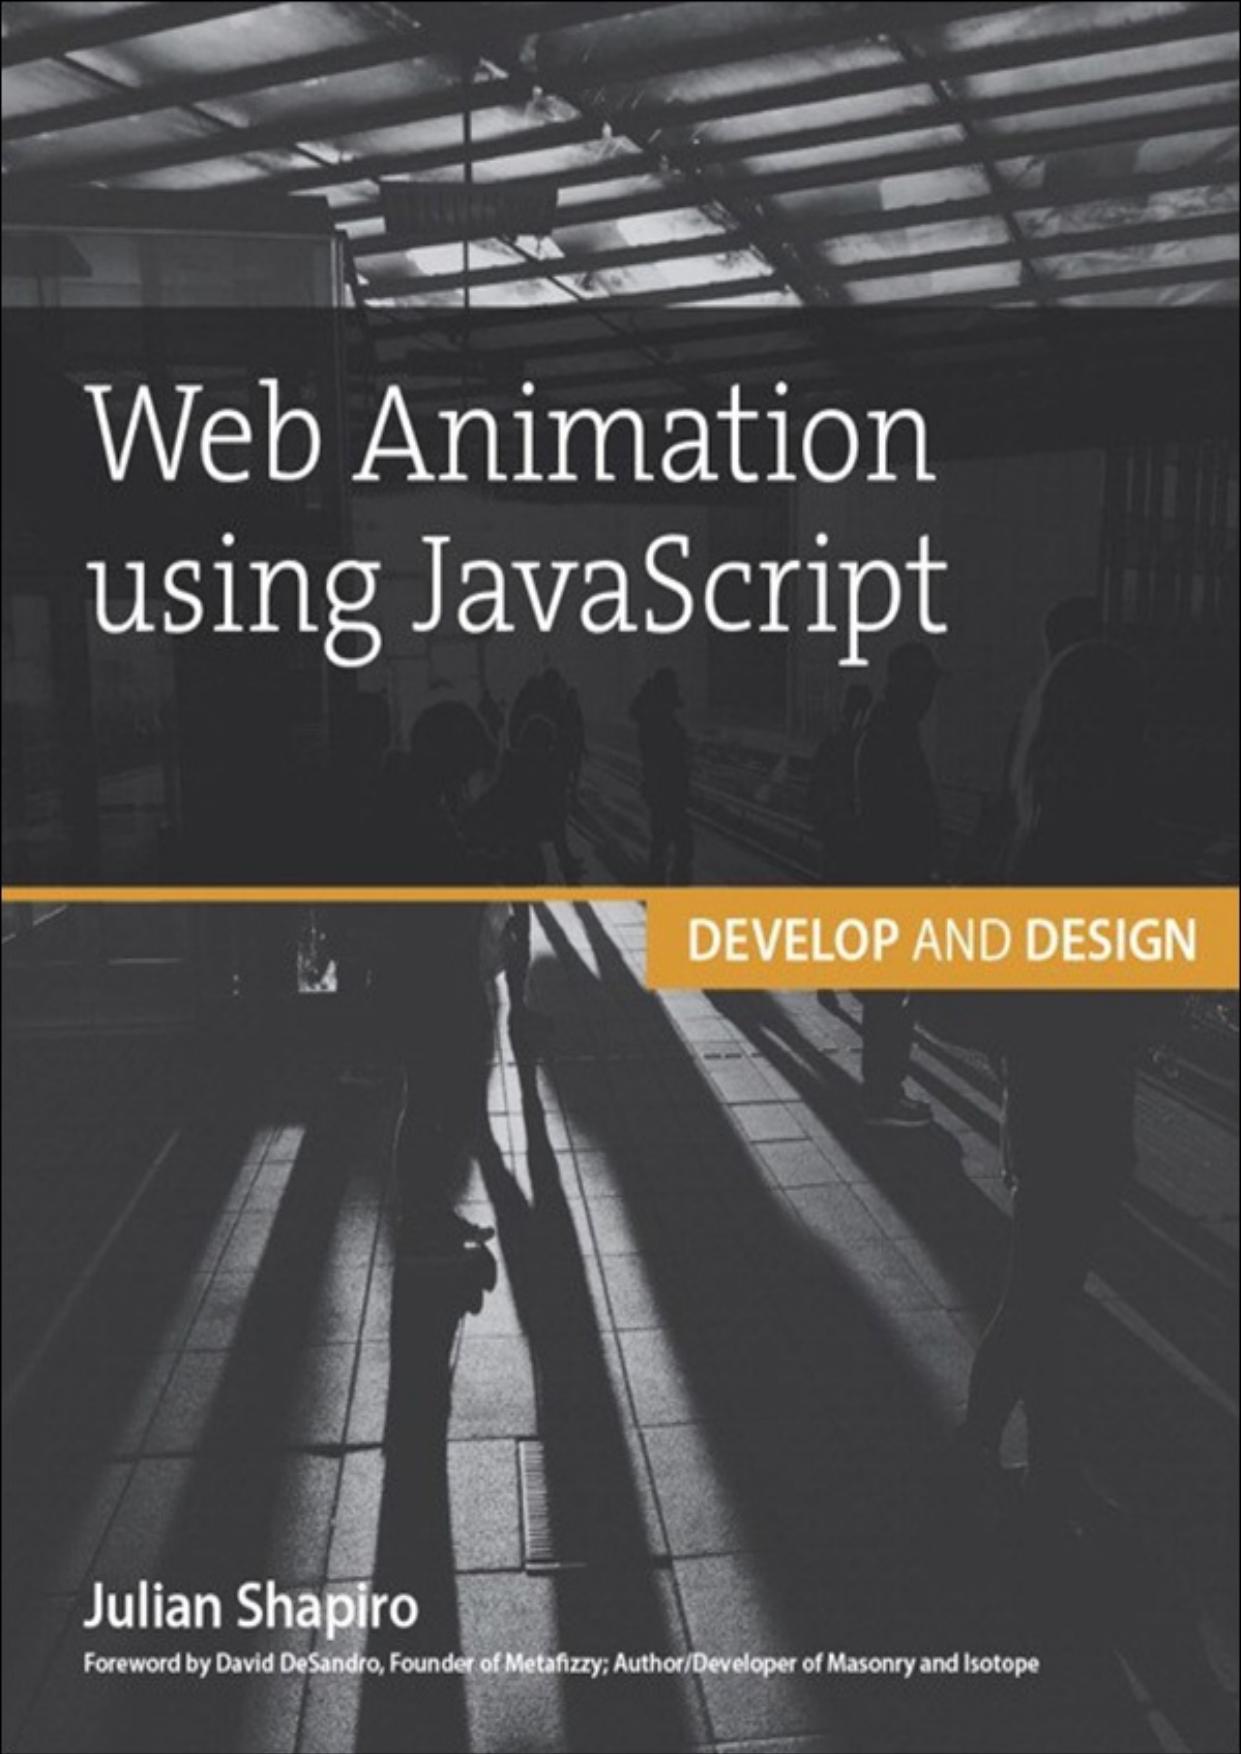 Web Animation Using JavaScript: Develop and Design